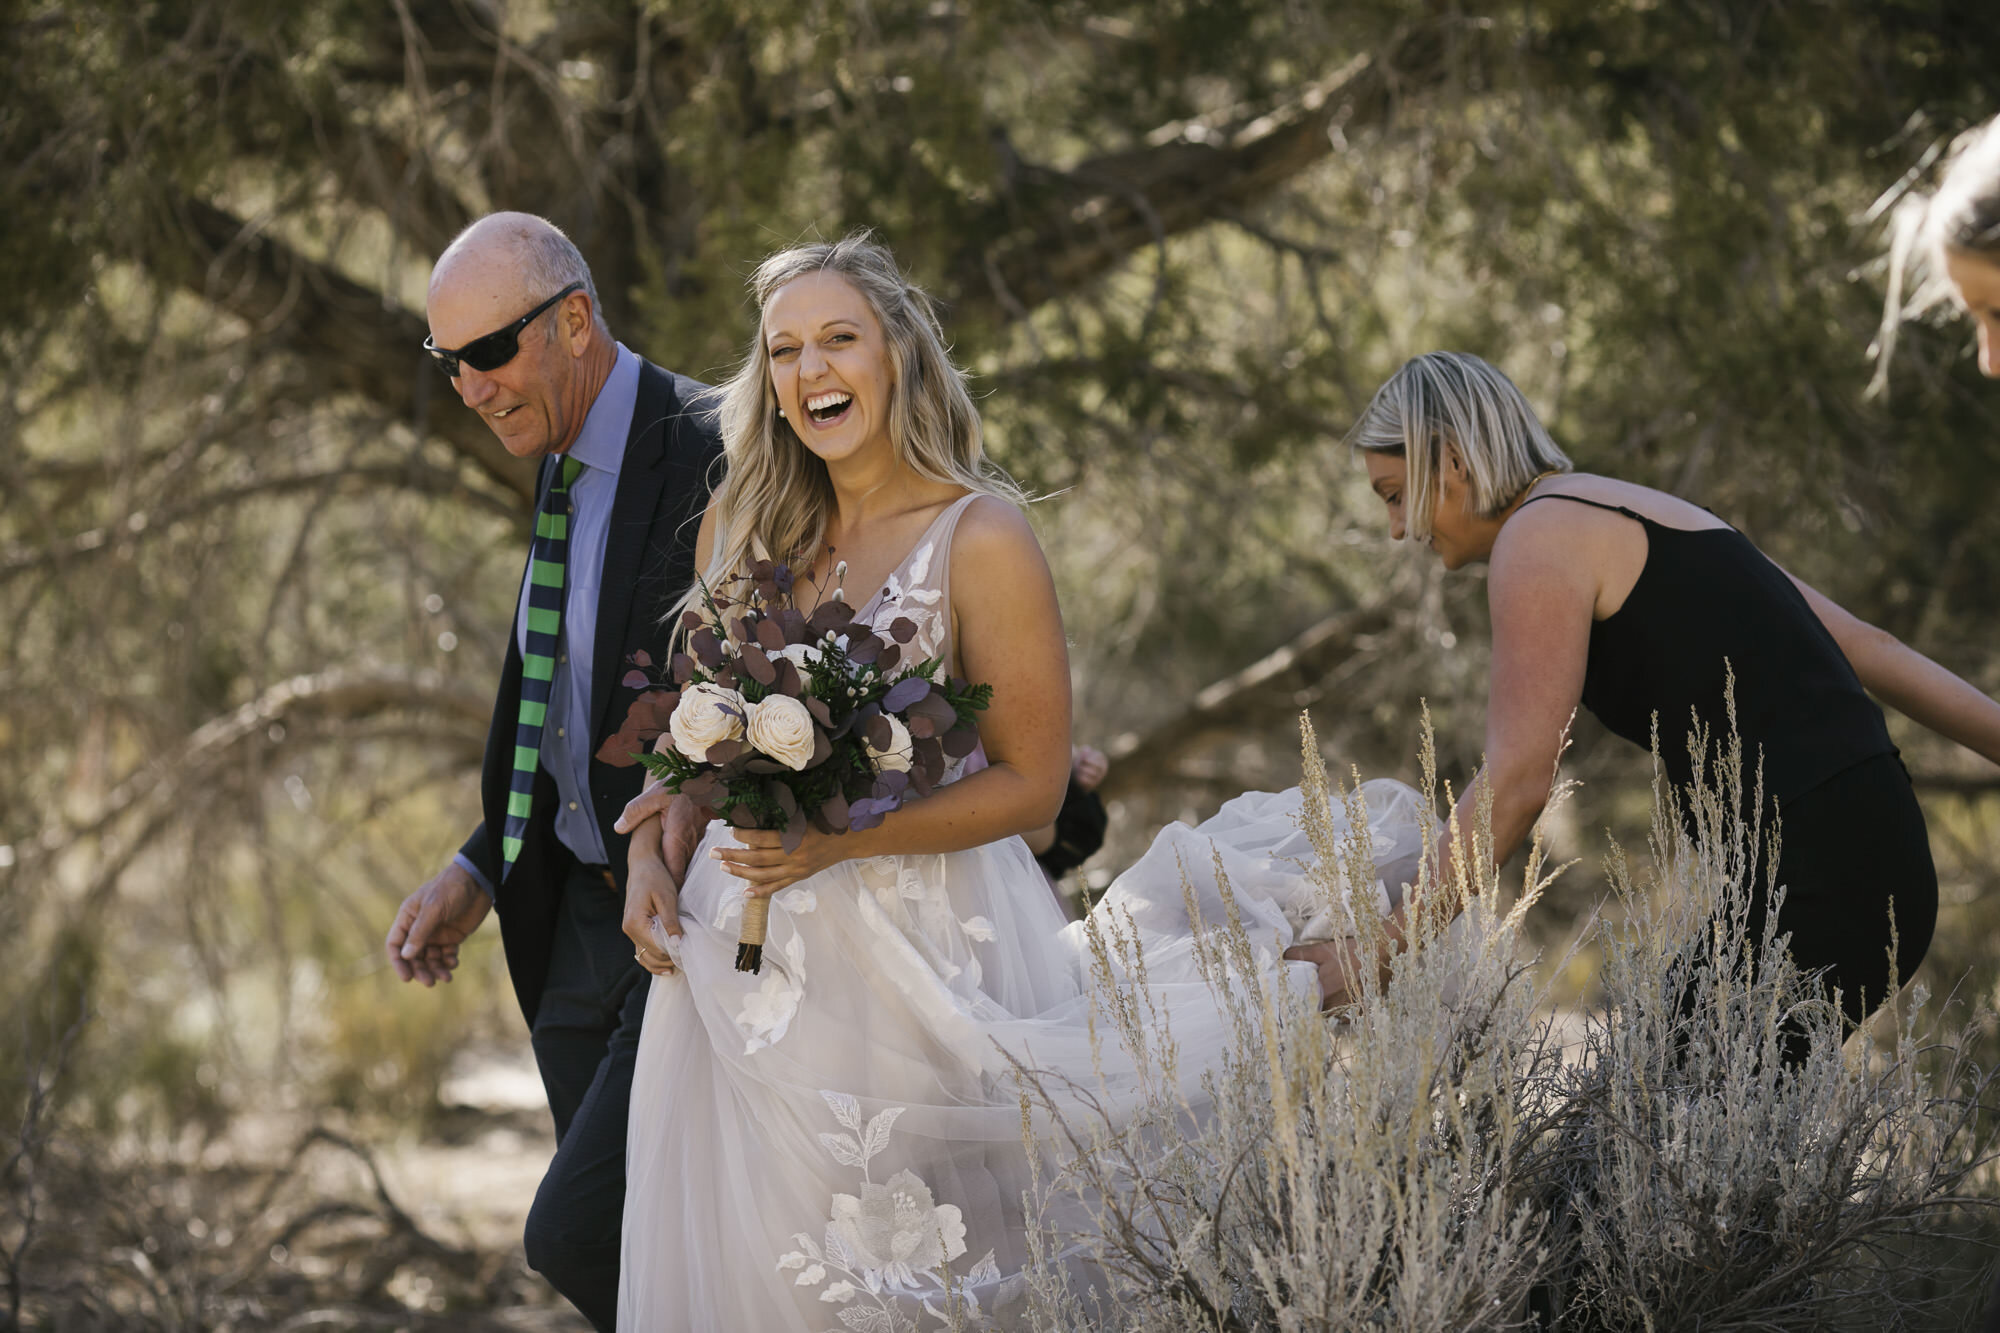 Brides joyfully walks into her Utah desert wedding ceremony with the help of her parents and sister